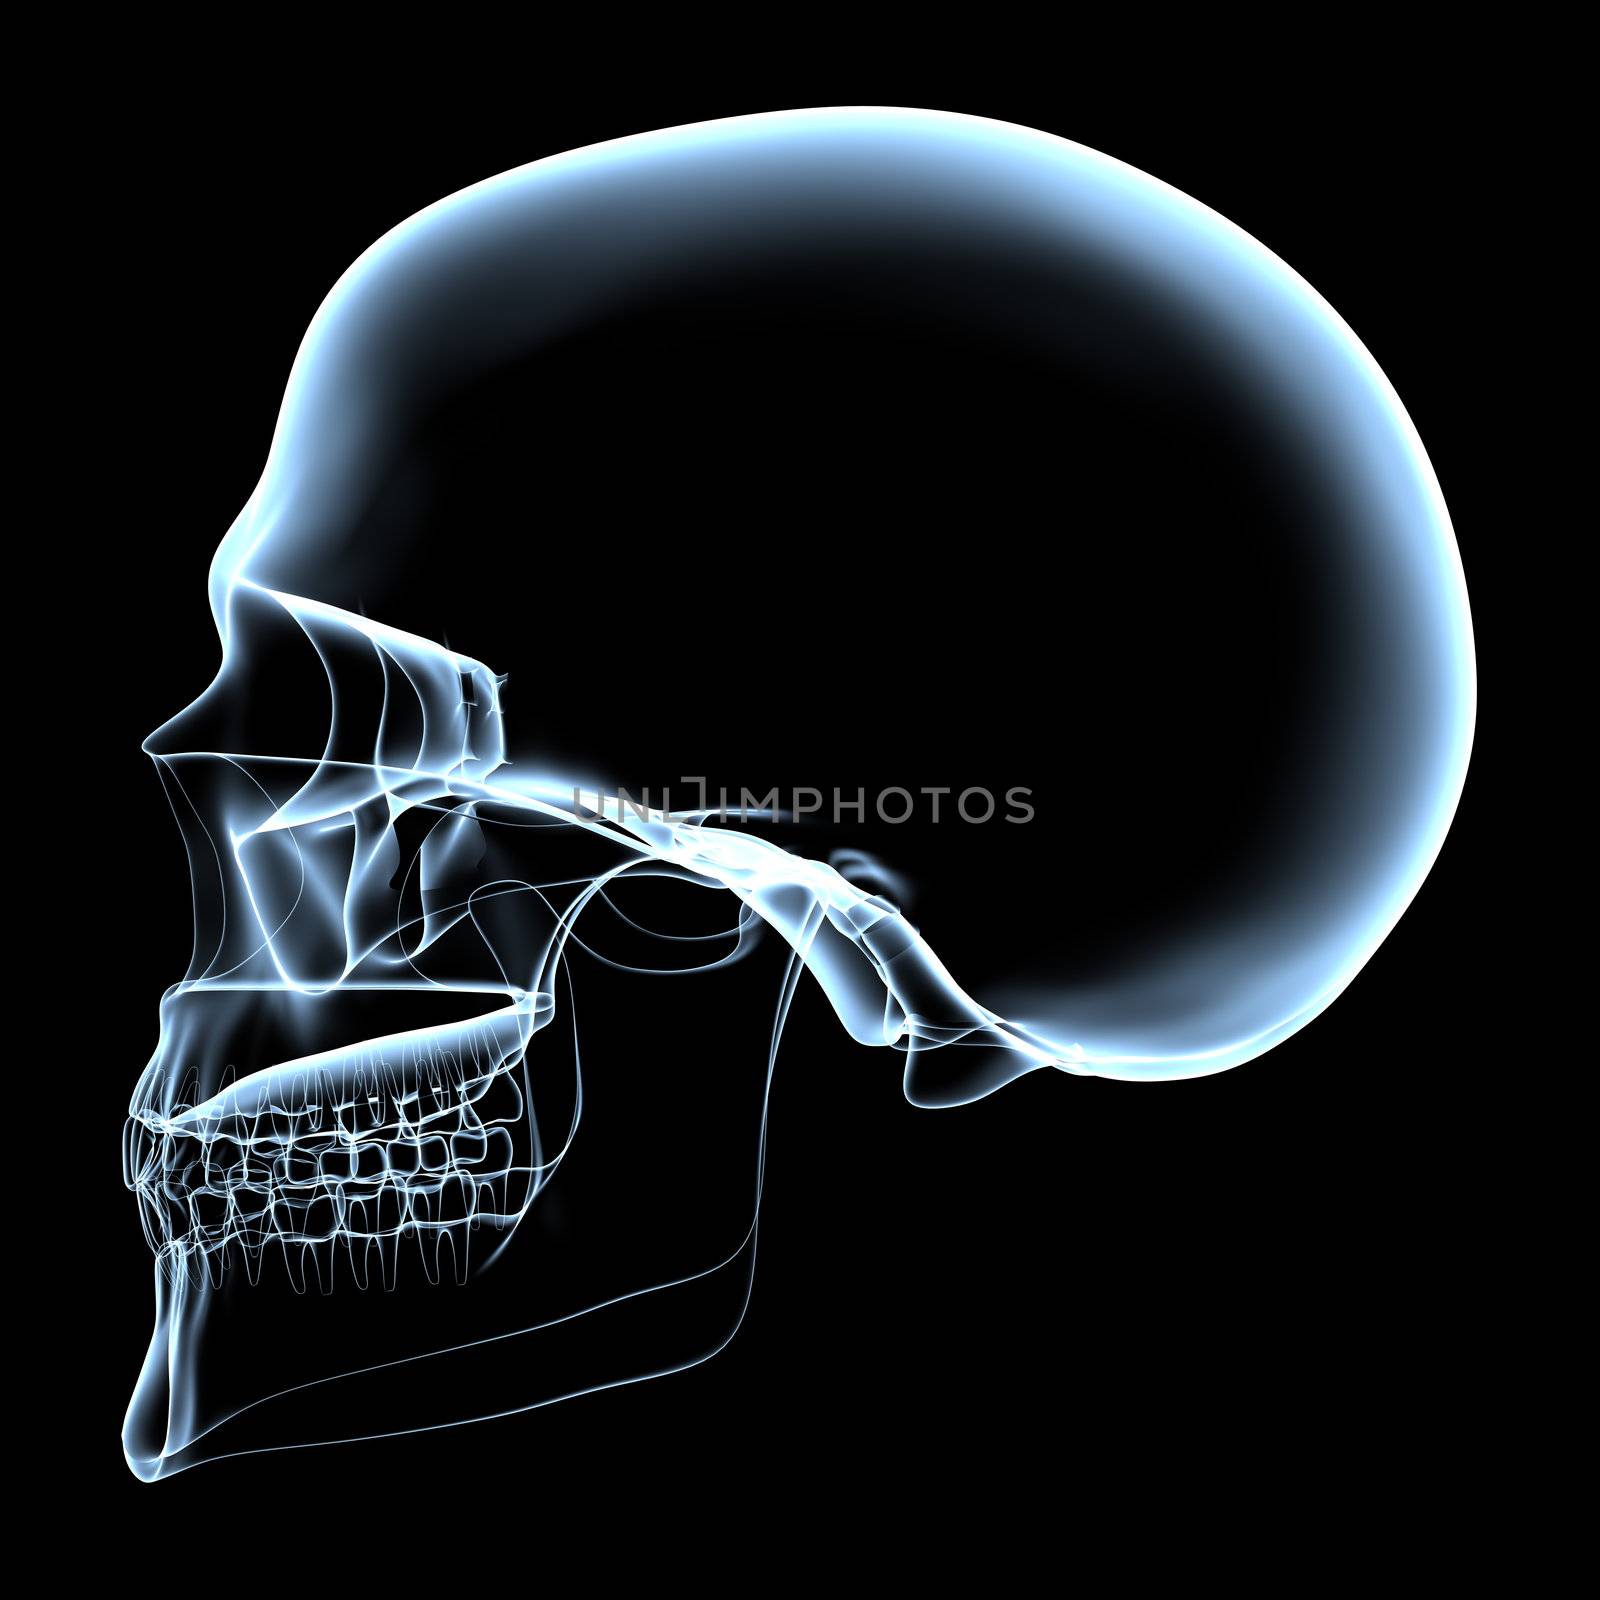 rendered bluish x-ray image of a human skull - side projection